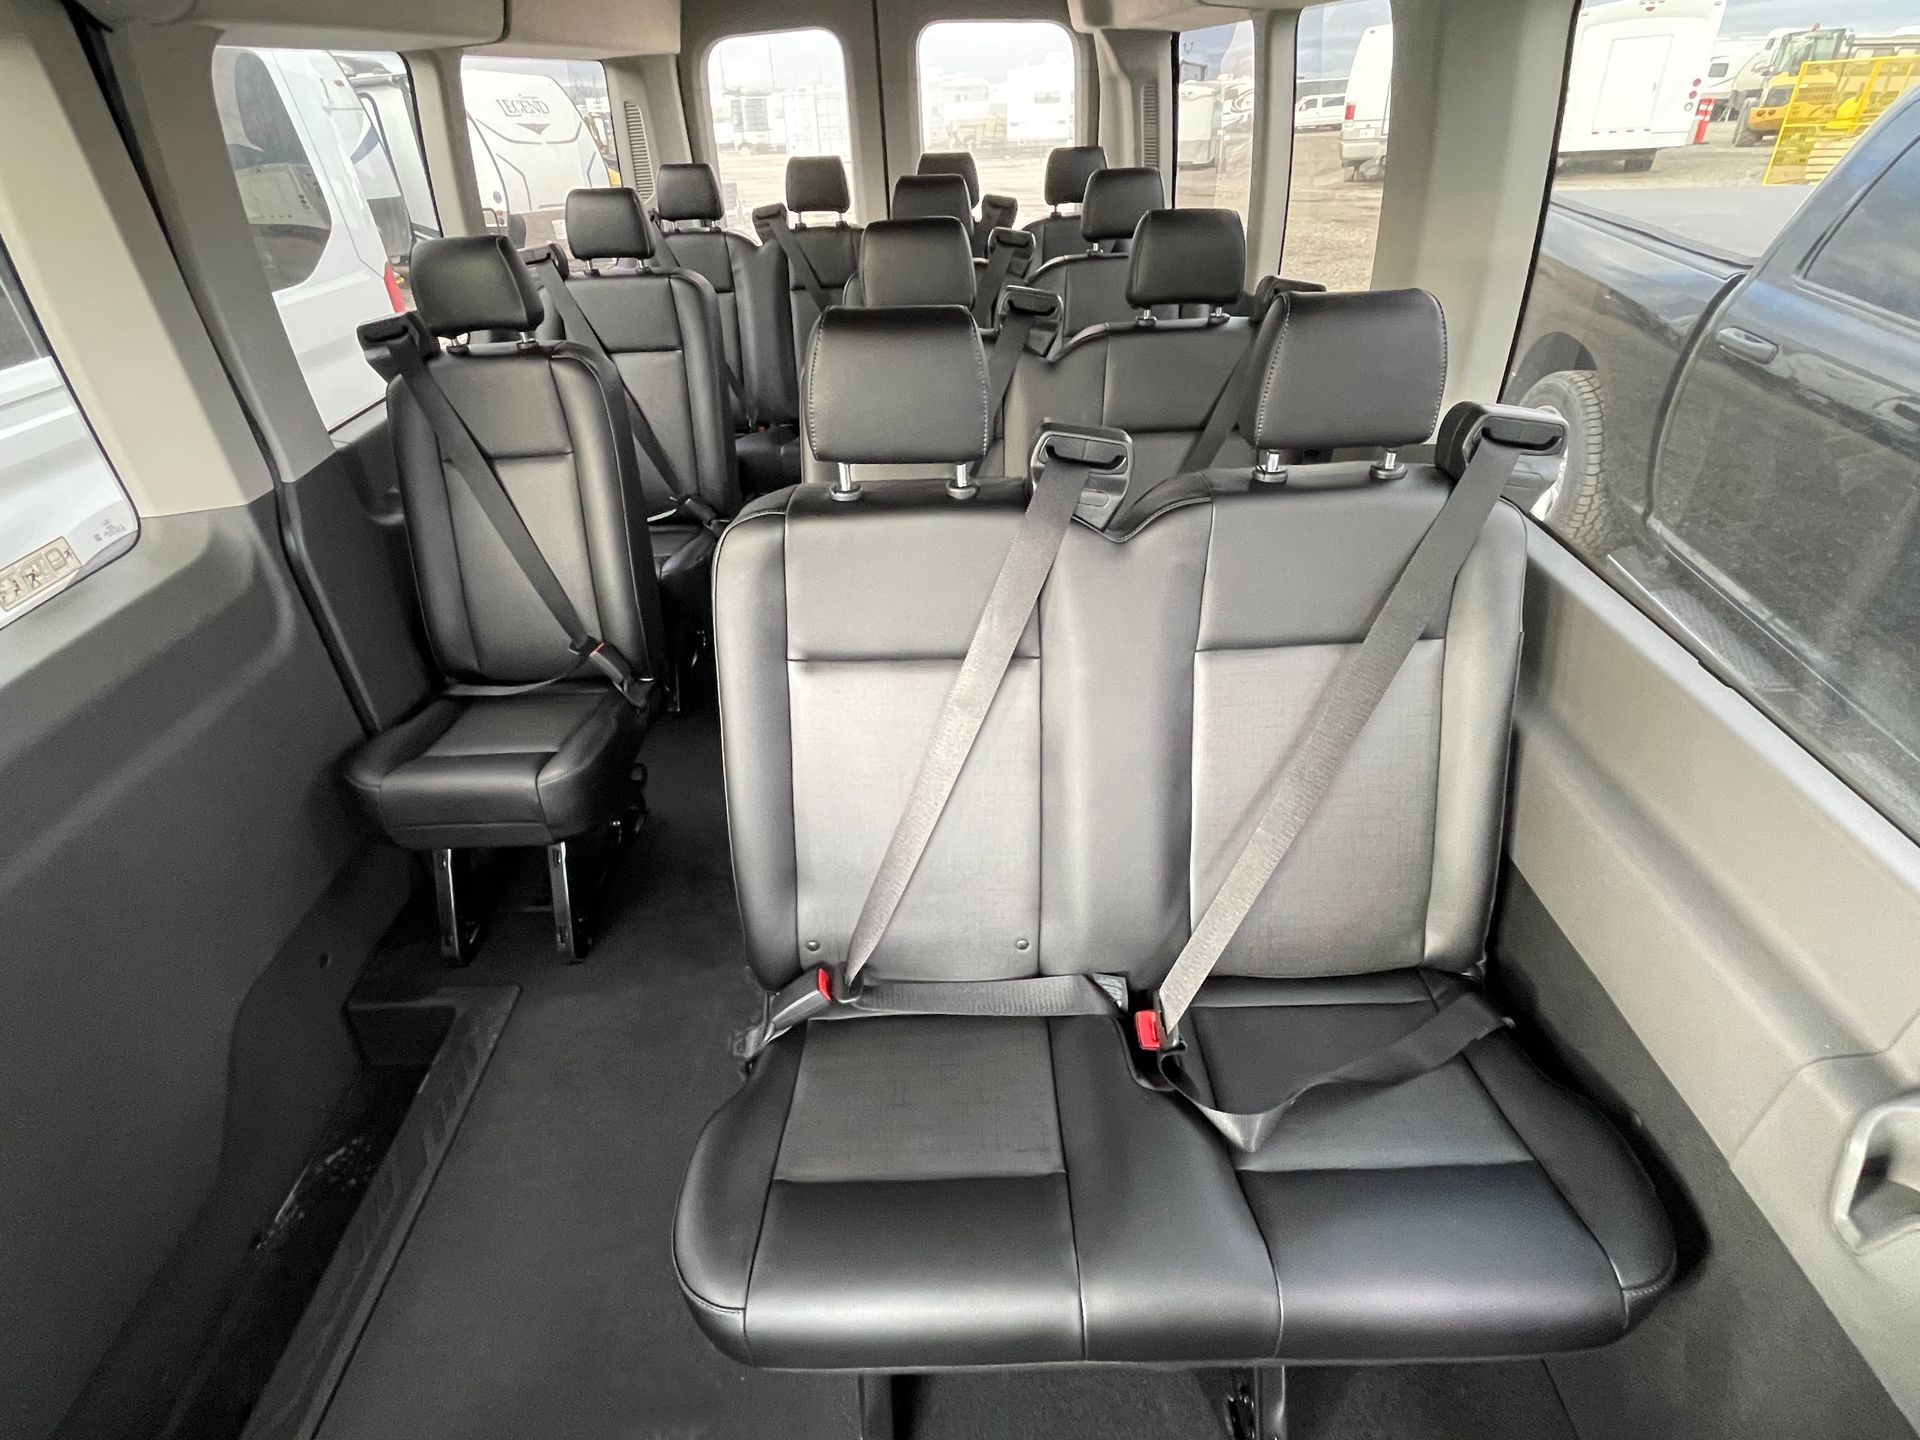 the inside of a van with seat belts on